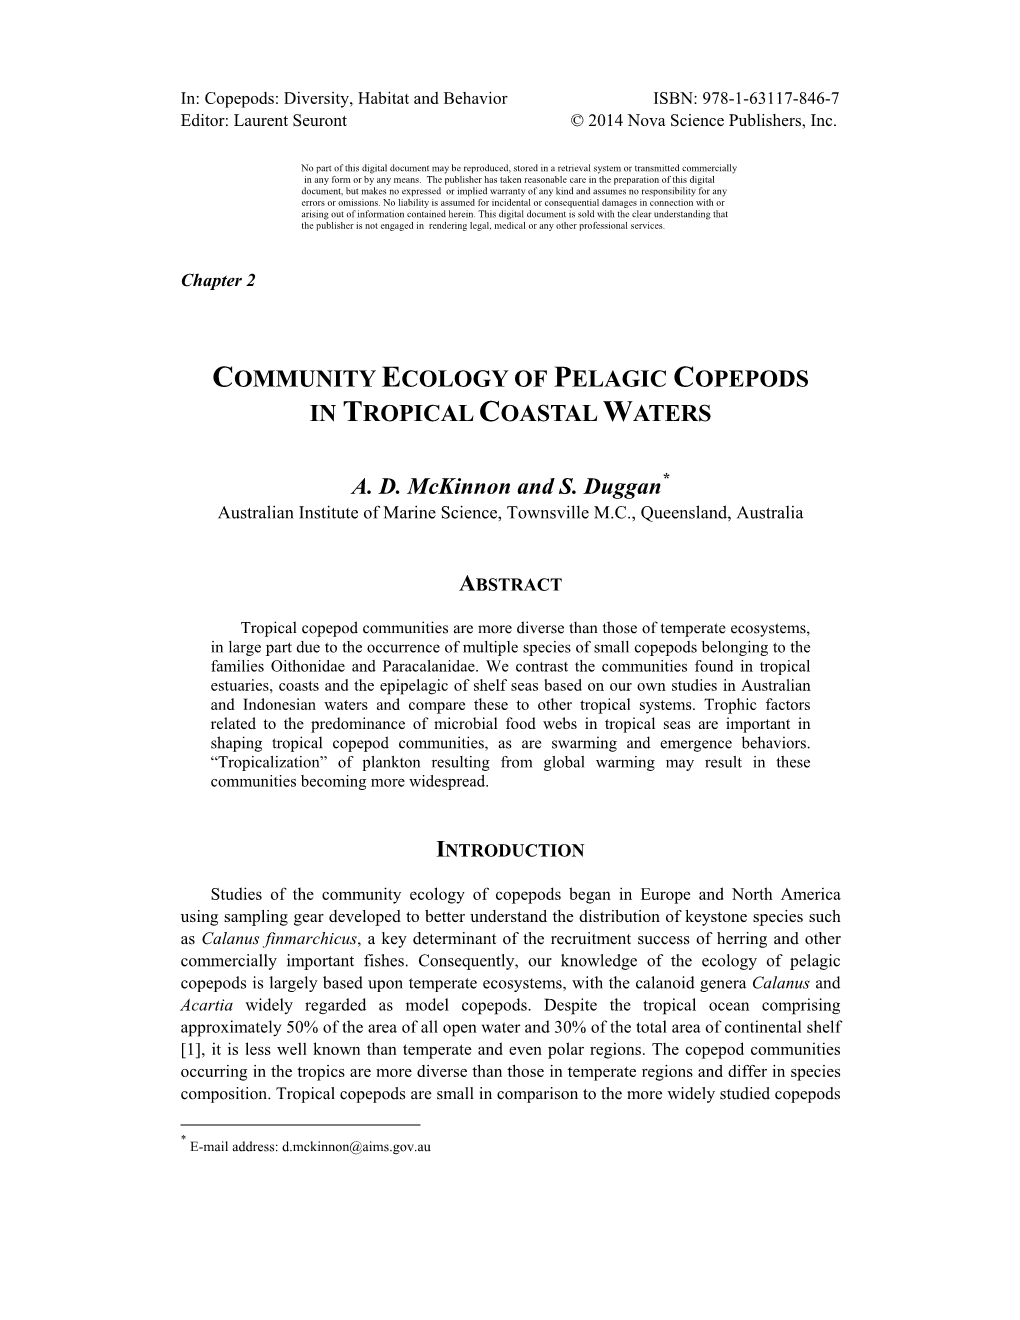 Community Ecology of Pelagic Copepods in Tropical Coastal Waters